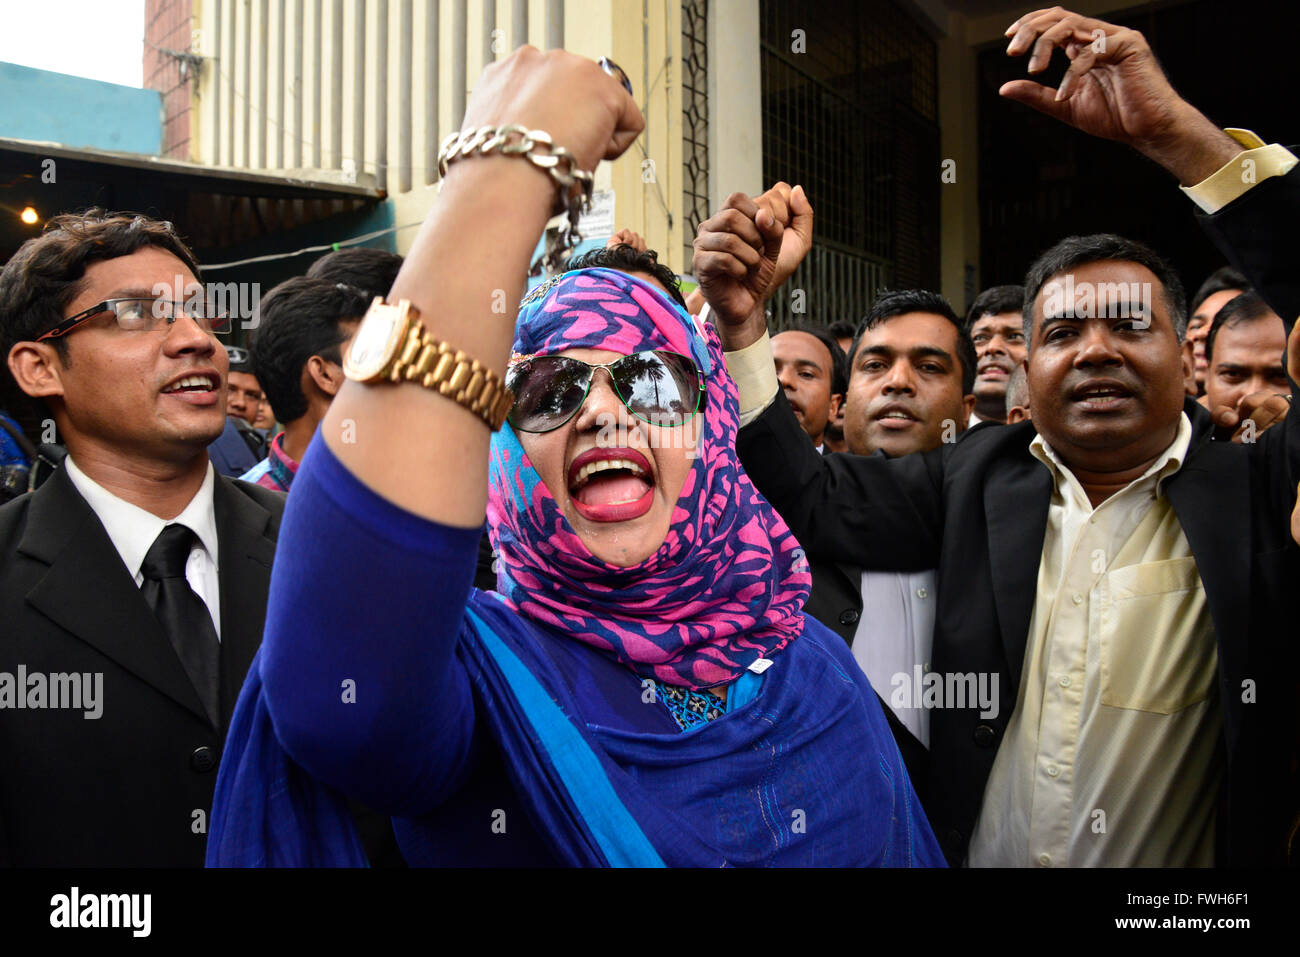 Dhaka, Bangladesh. 5th April, 2016. Bangladesh Nationalist Party (BNP) supporters and lawyers shout slogans as former Bangladesh prime minister and Bangladesh Nationalist Party (BNP) leader Khaleda Zia appears in court in Dhaka on April 5, 2016. A court in Bangladesh granted bail to opposition leader Khaleda Zia on April 5 after issuing a warrant for her arrest over a deadly fire-bomb attack on a bus, her lawyer said. Credit:  Mamunur Rashid/Alamy Live News Stock Photo